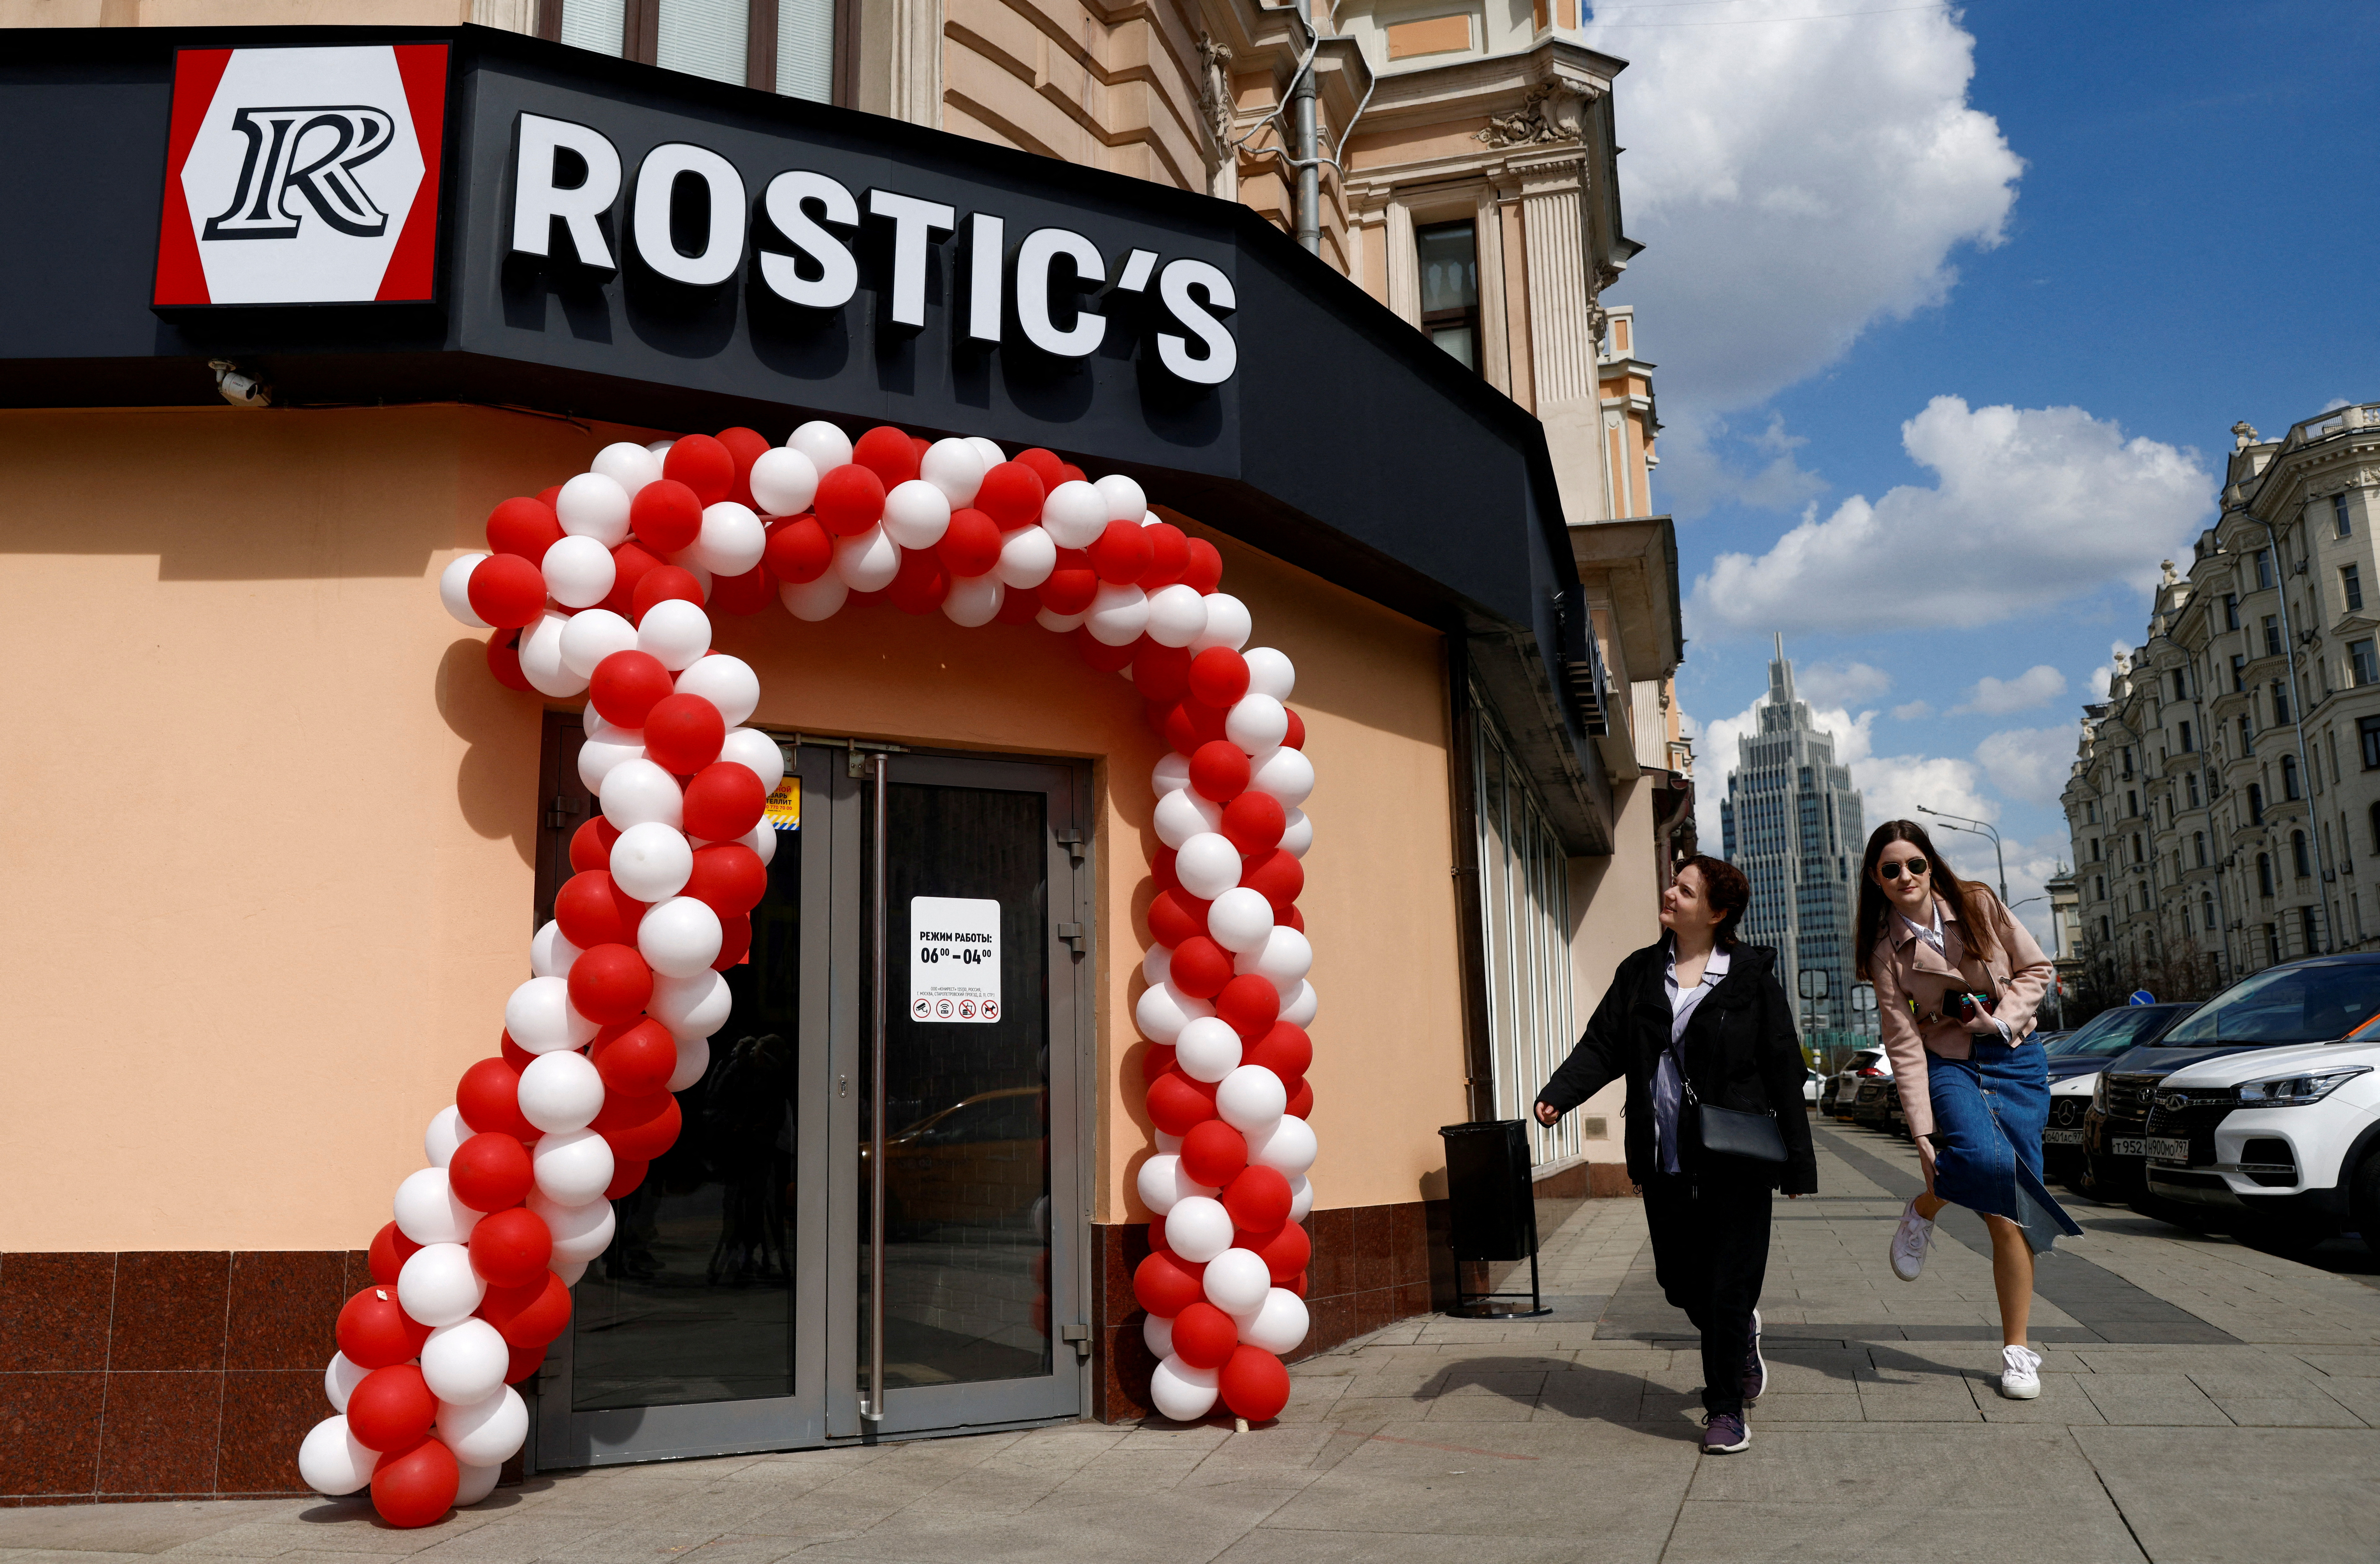 Russia brings back Rostic's restaurants after KFC sells up